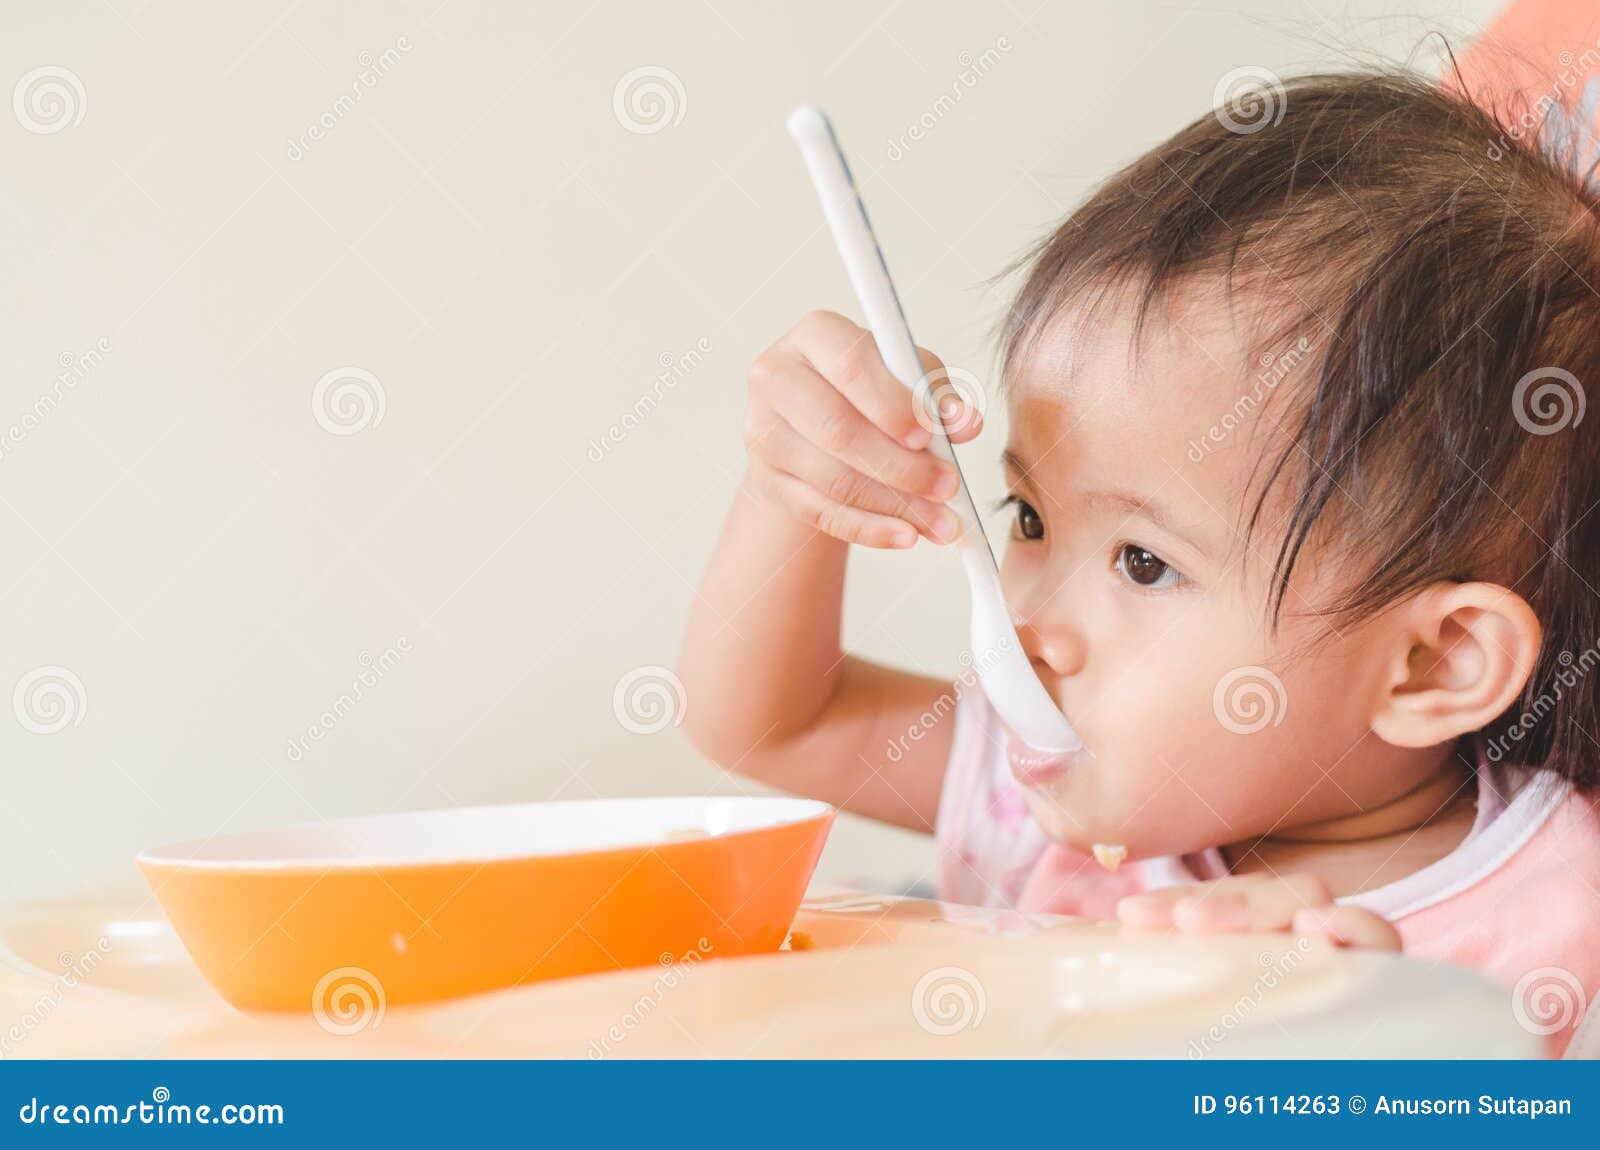 Asian Toddler Girl Eating Cereals With Milk On High Chair At Home